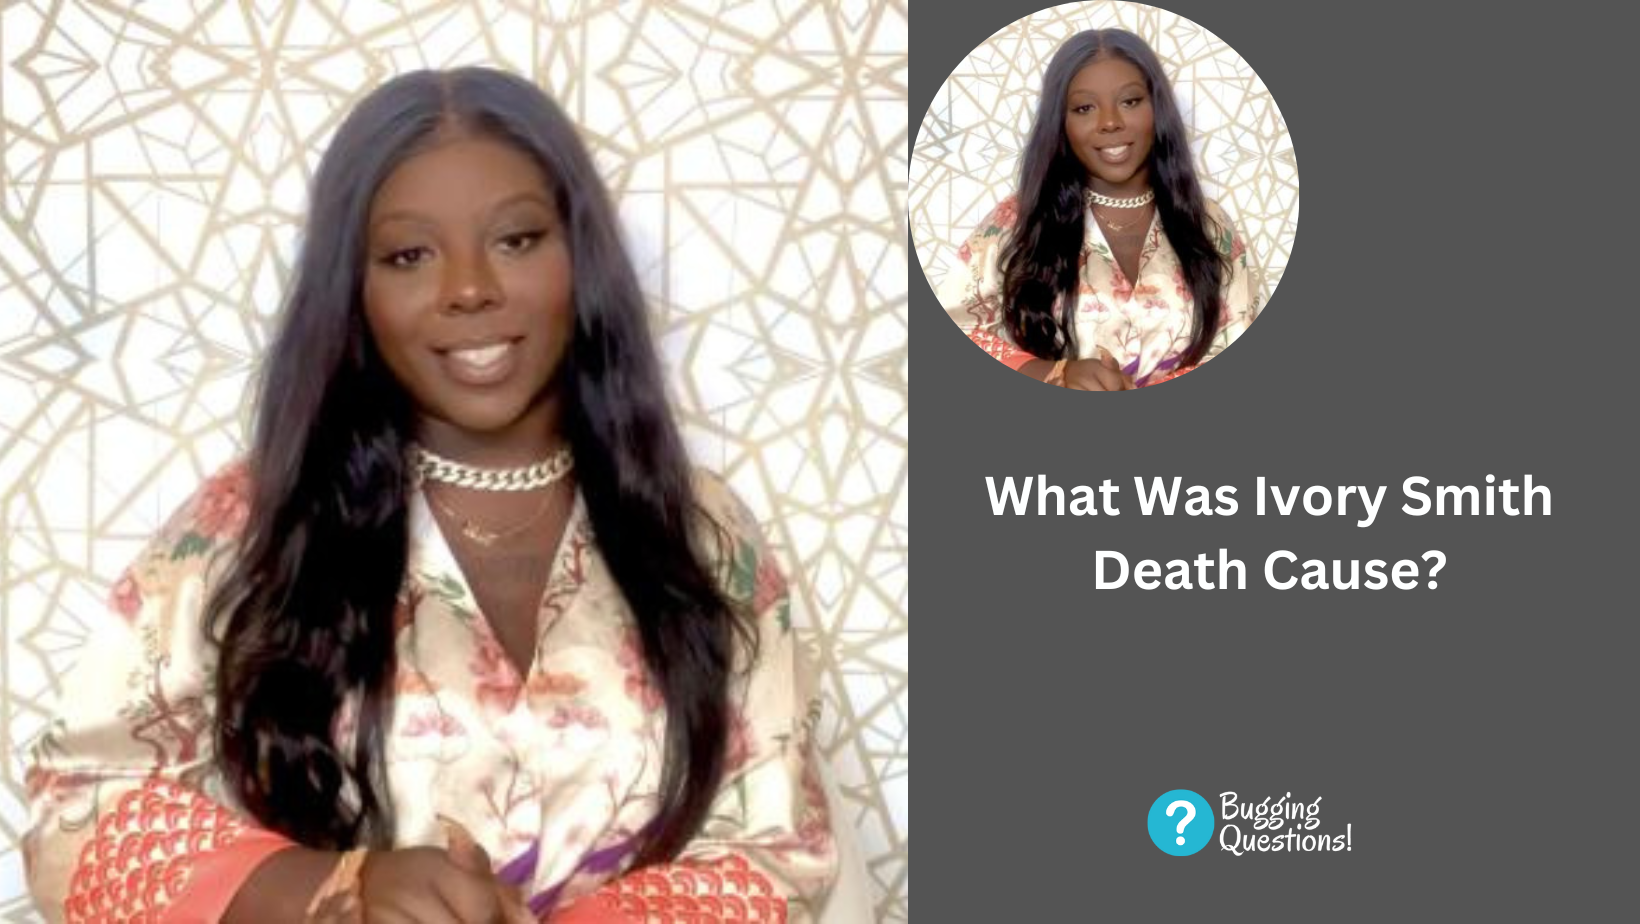 What Was Ivory Smith Death Cause?